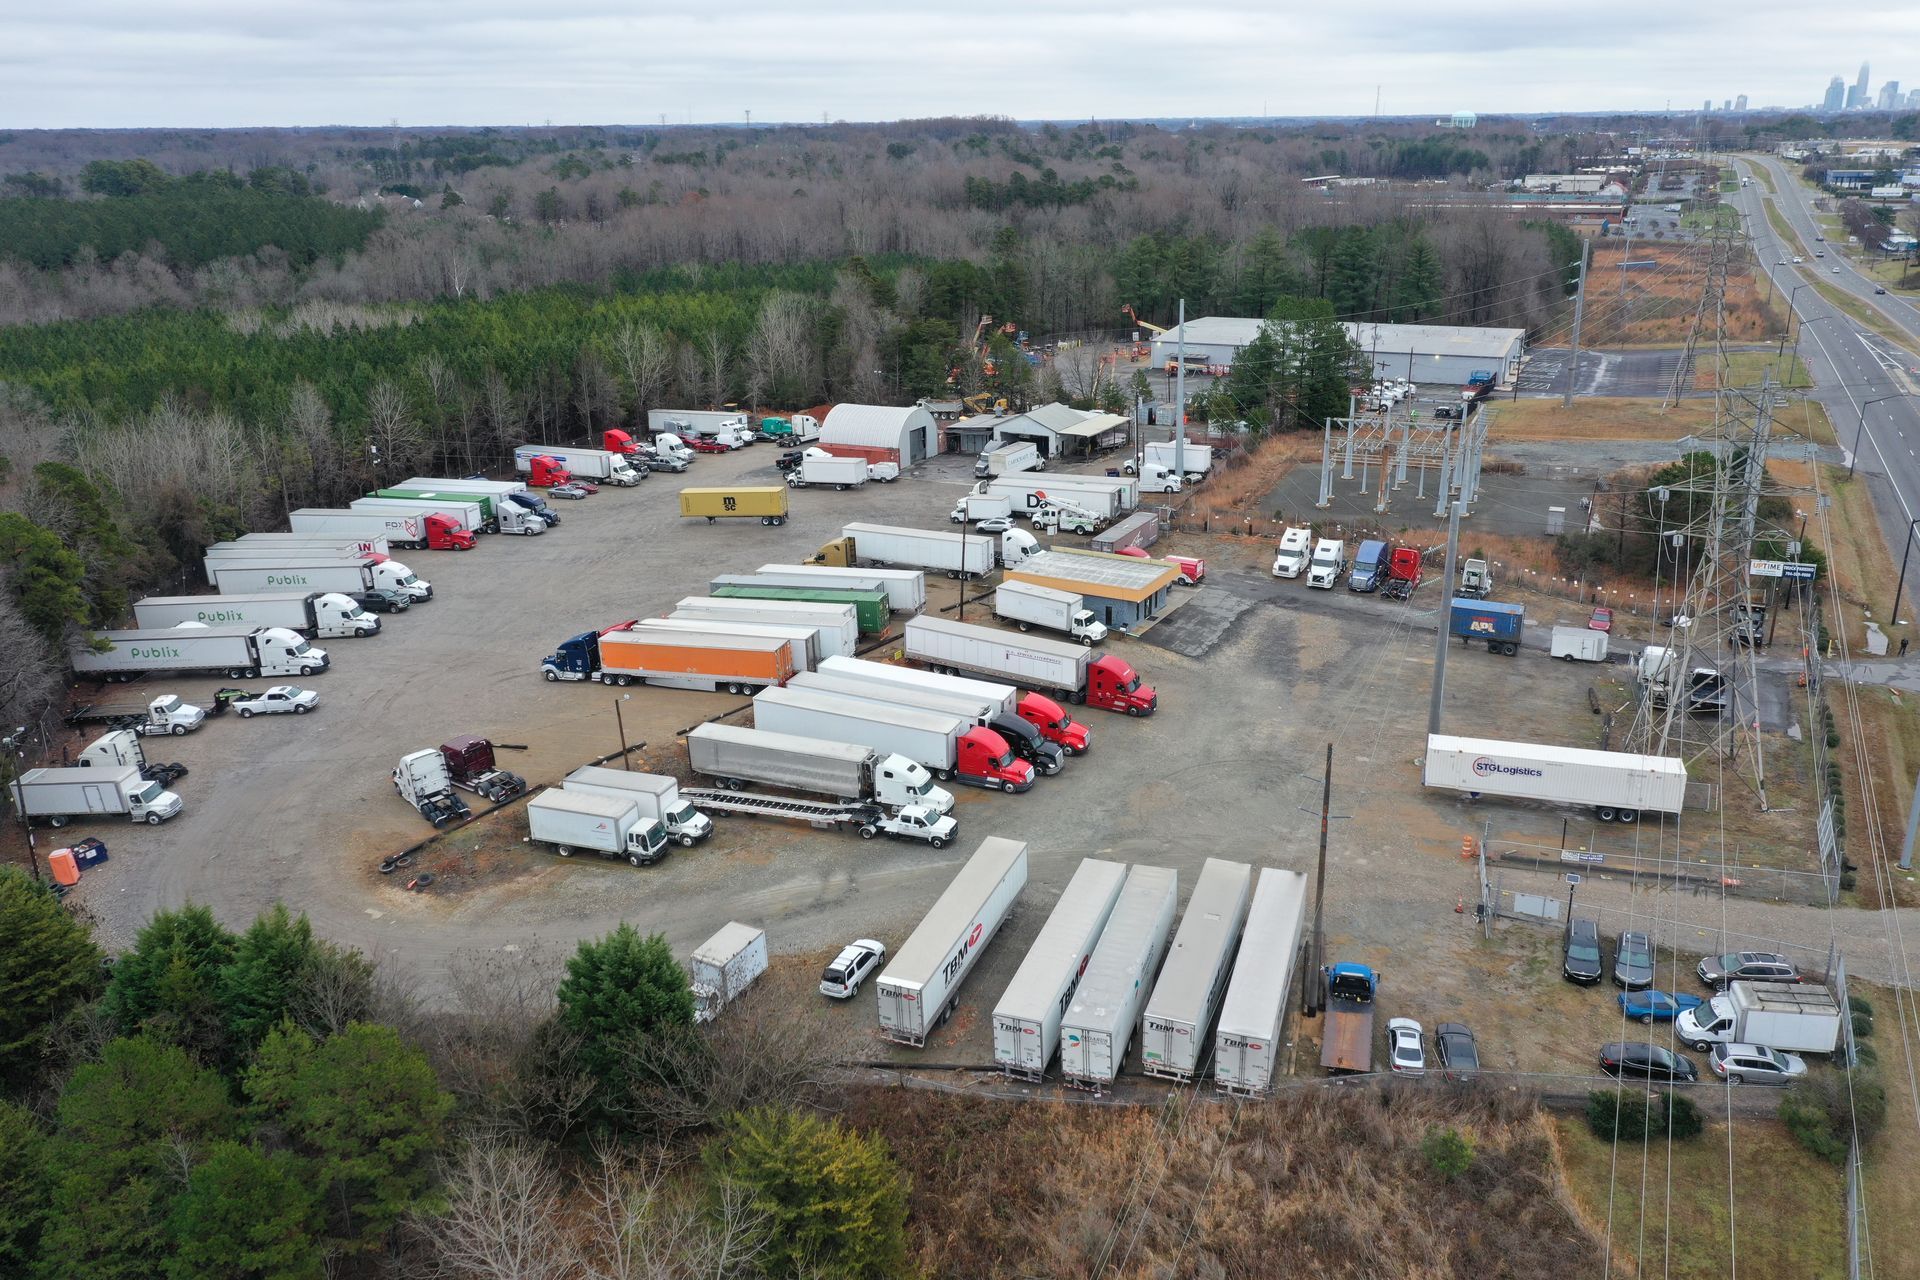 An aerial view of a parking lot filled with trucks and trailers.